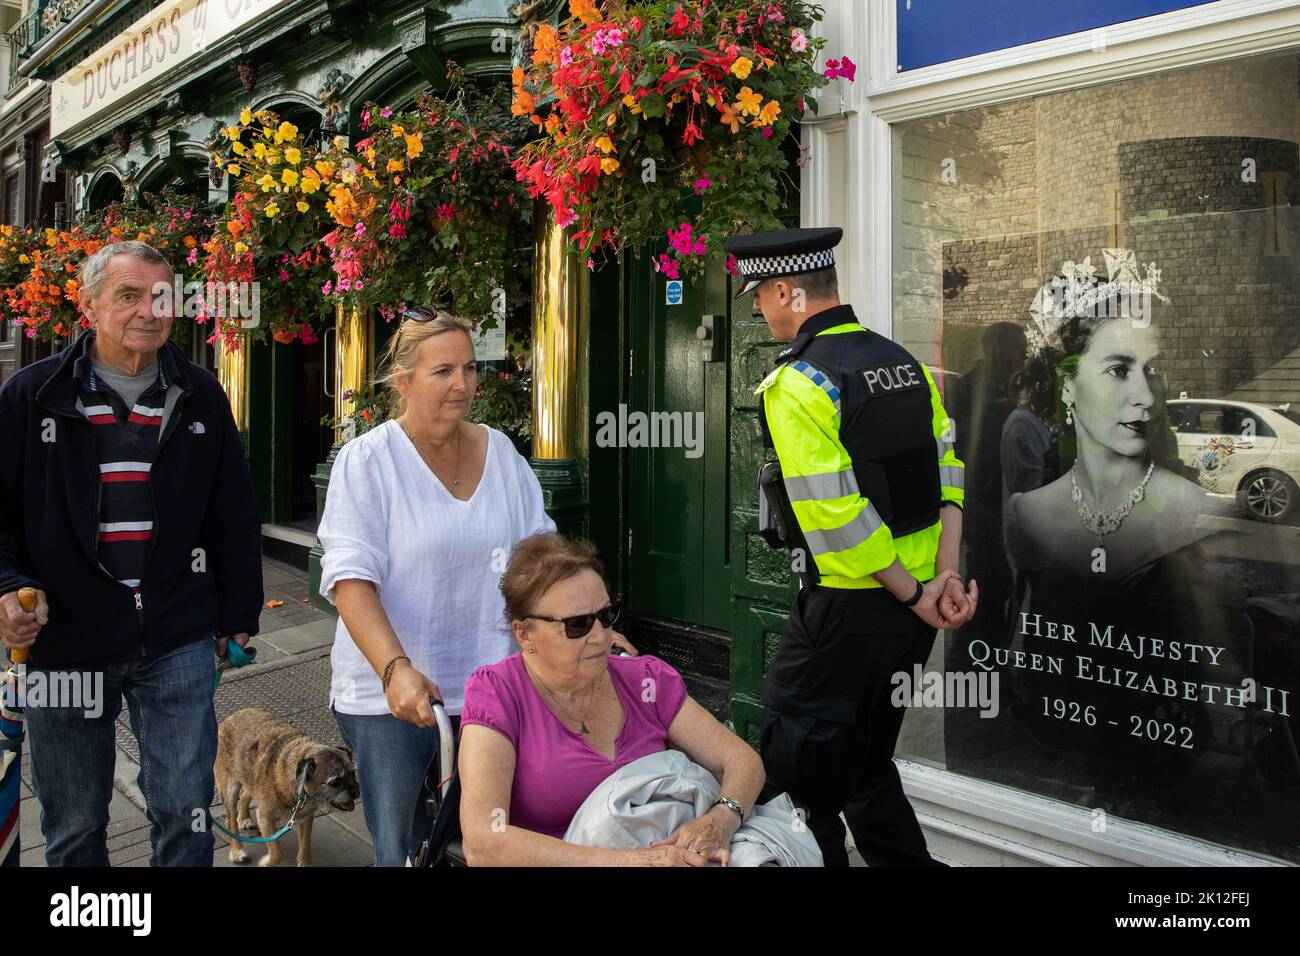 Windsor, UK. 14th September, 2022. A police officer and members of the public pass a tribute to Queen Elizabeth II displayed in a shop window. Queen Elizabeth II, the UK's longest-serving monarch, died at Balmoral aged 96 on 8th September after a reign lasting 70 years and will be buried in the King George VI memorial chapel in Windsor following a state funeral in Westminster Abbey on 19th September. Credit: Mark Kerrison/Alamy Live News Stock Photo